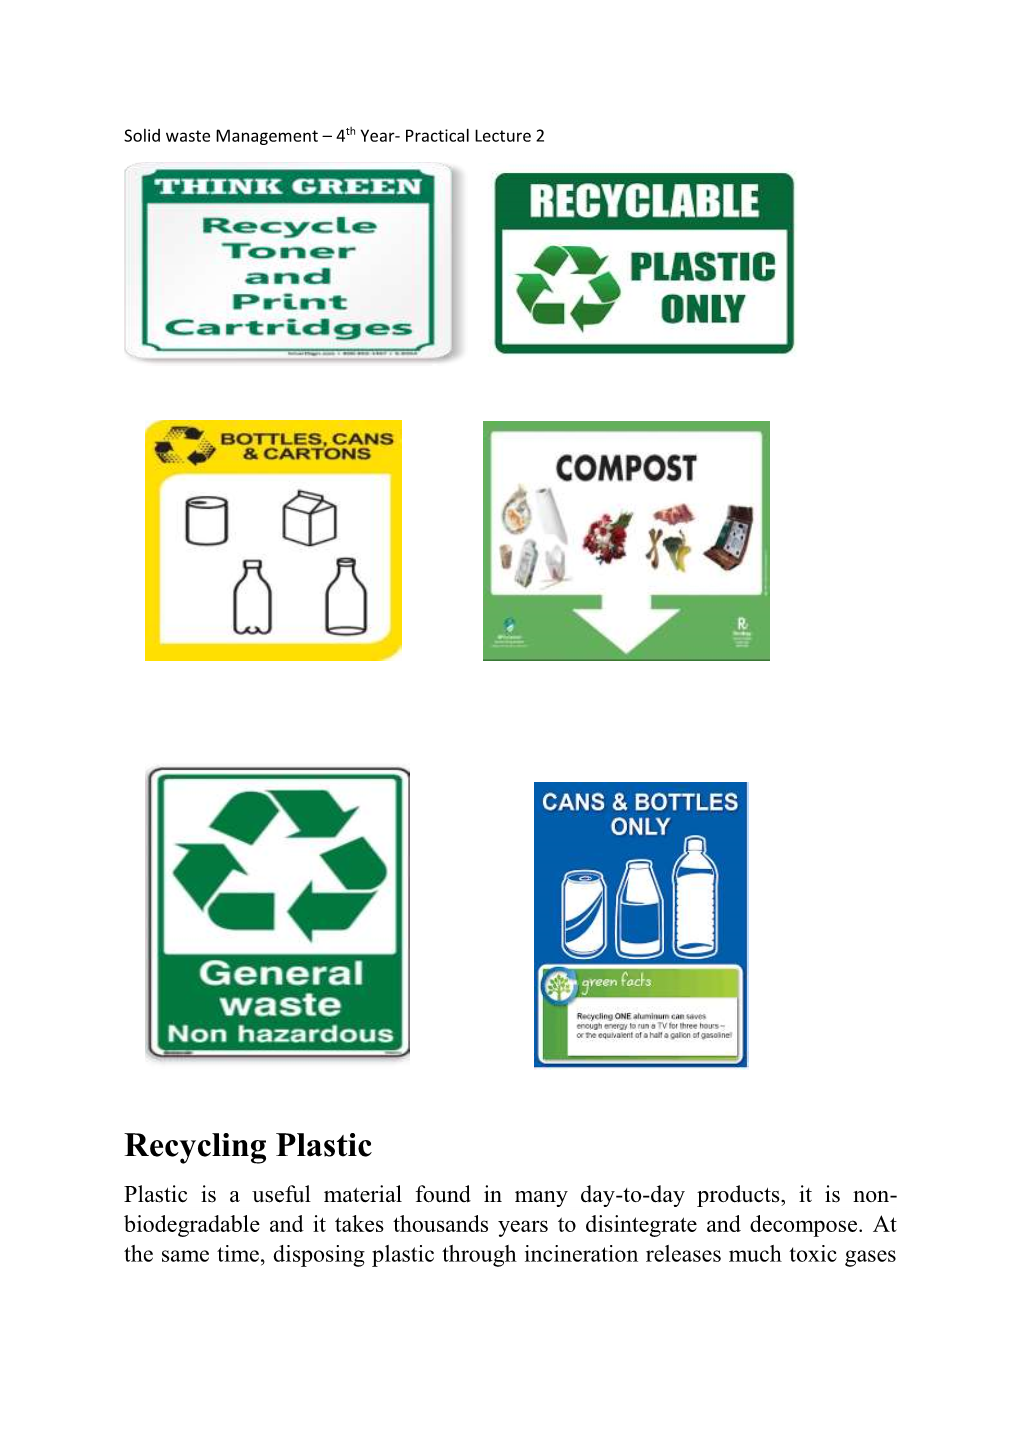 Recycling Plastic Plastic Is a Useful Material Found in Many Day-To-Day Products, It Is Non- Biodegradable and It Takes Thousands Years to Disintegrate and Decompose